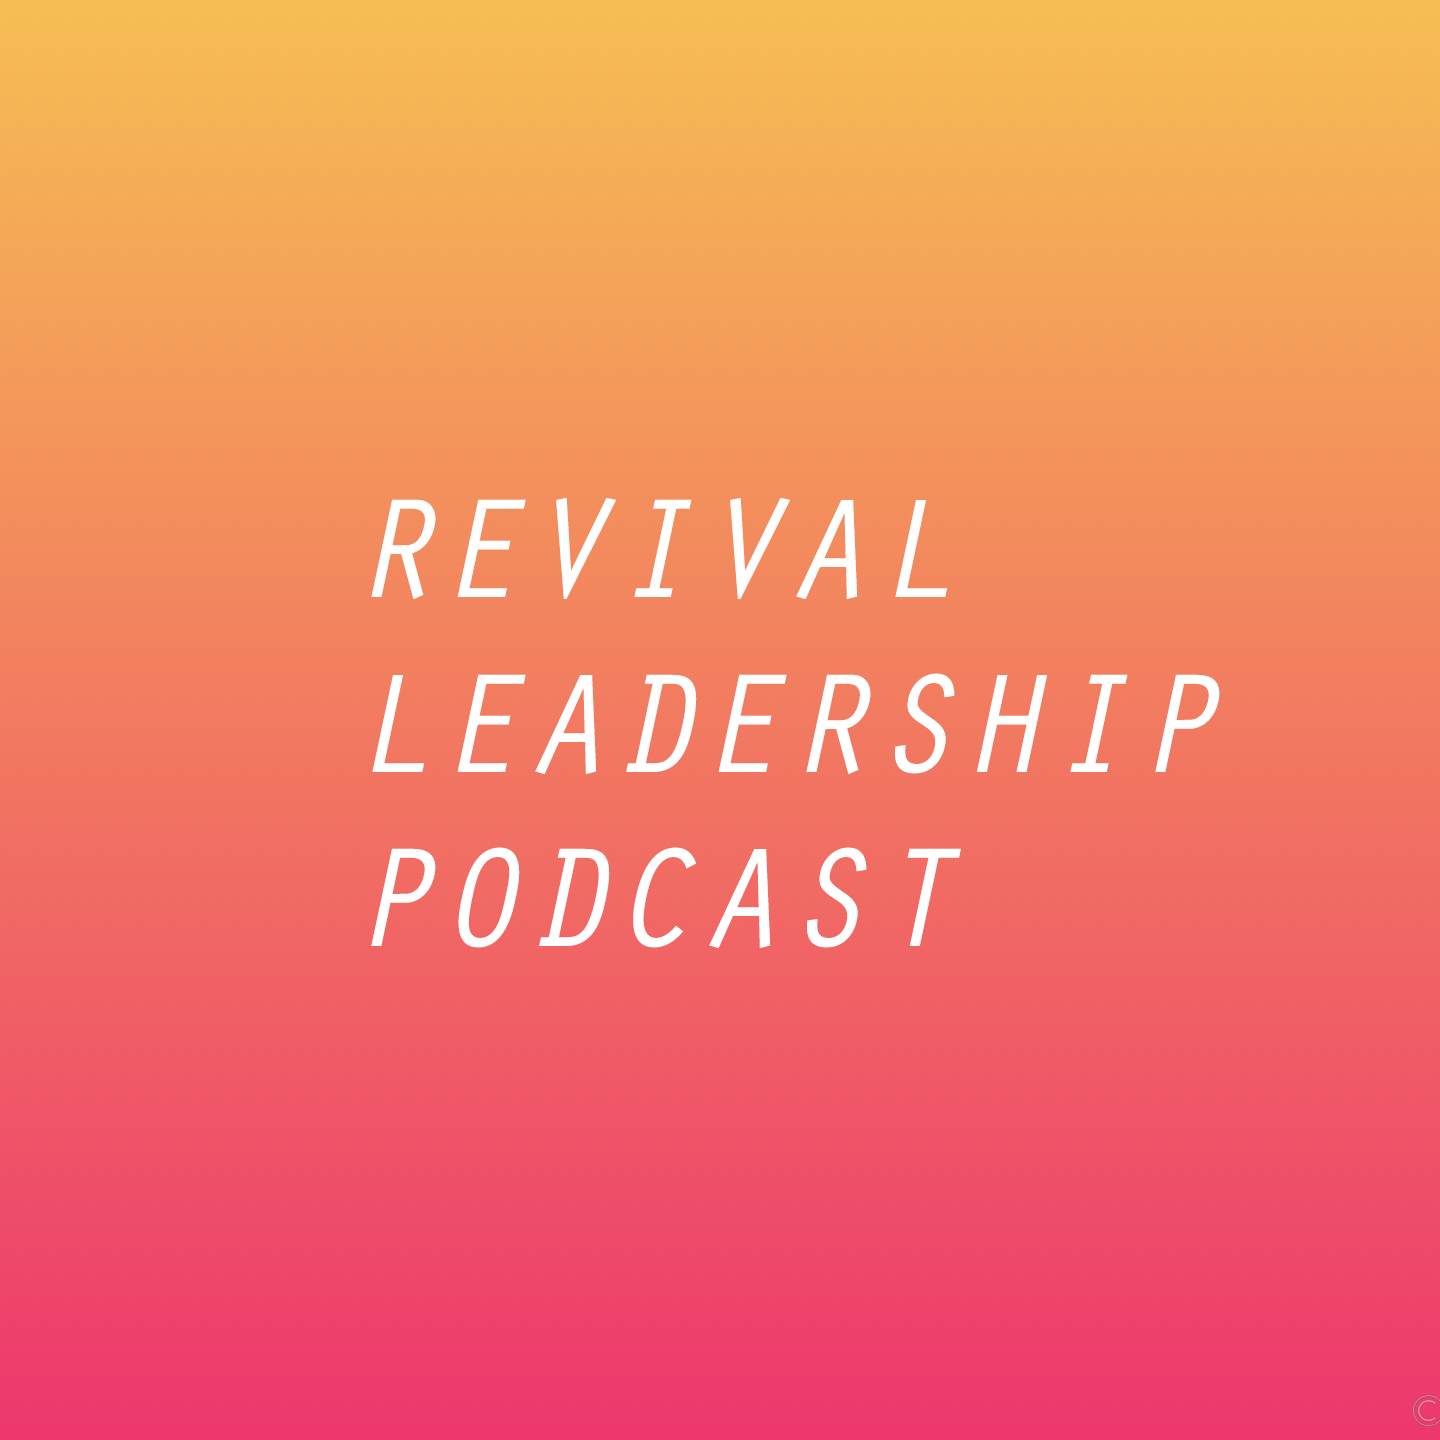 The Revival Leadership Podcast